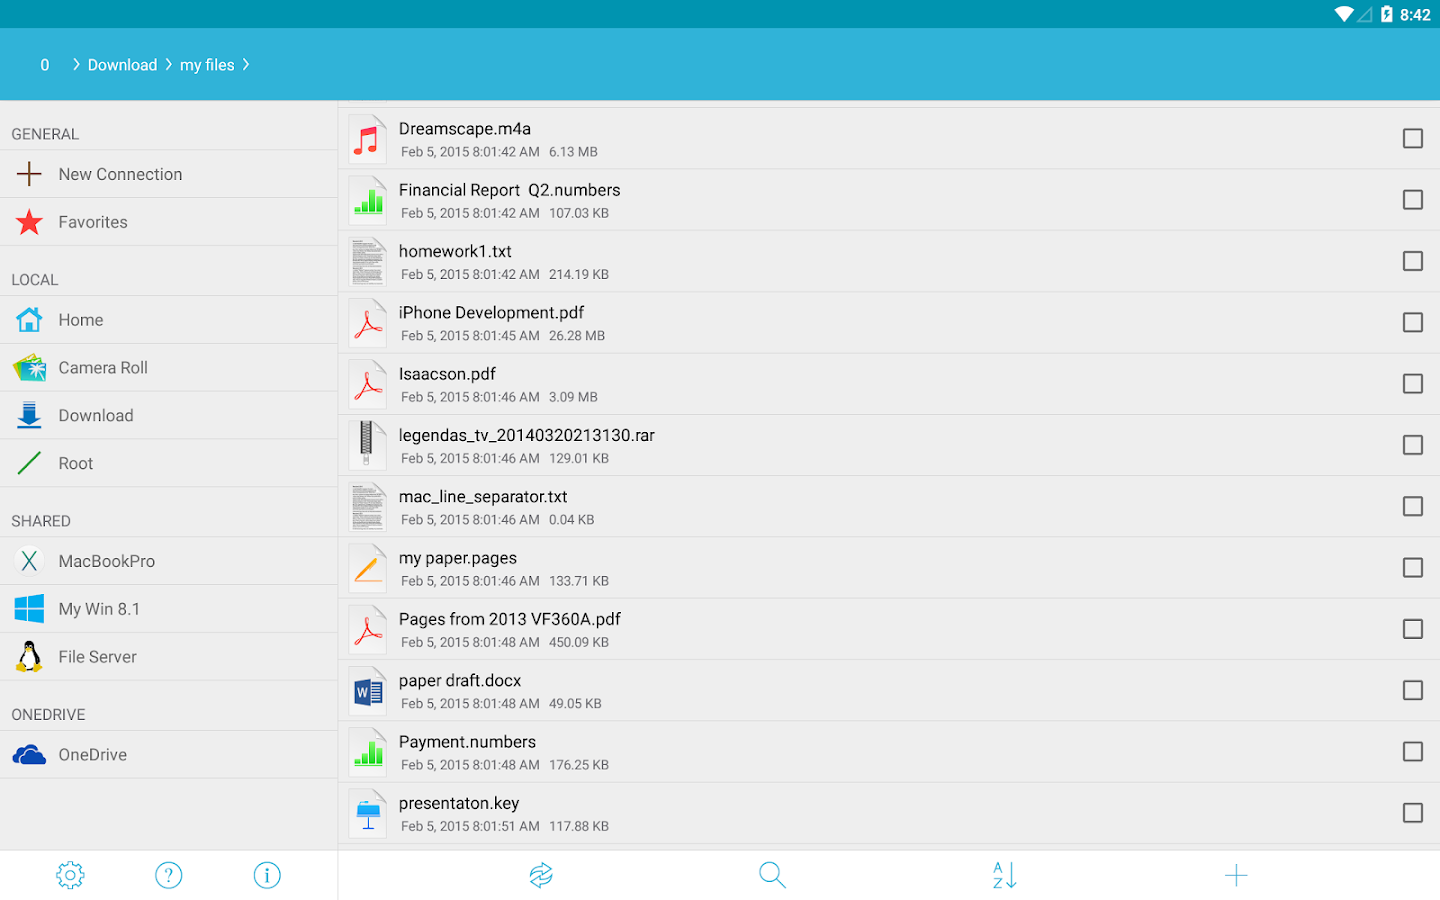 File Explorer (PC, Mac, NAS) - Android Apps on Google Play1440 x 900